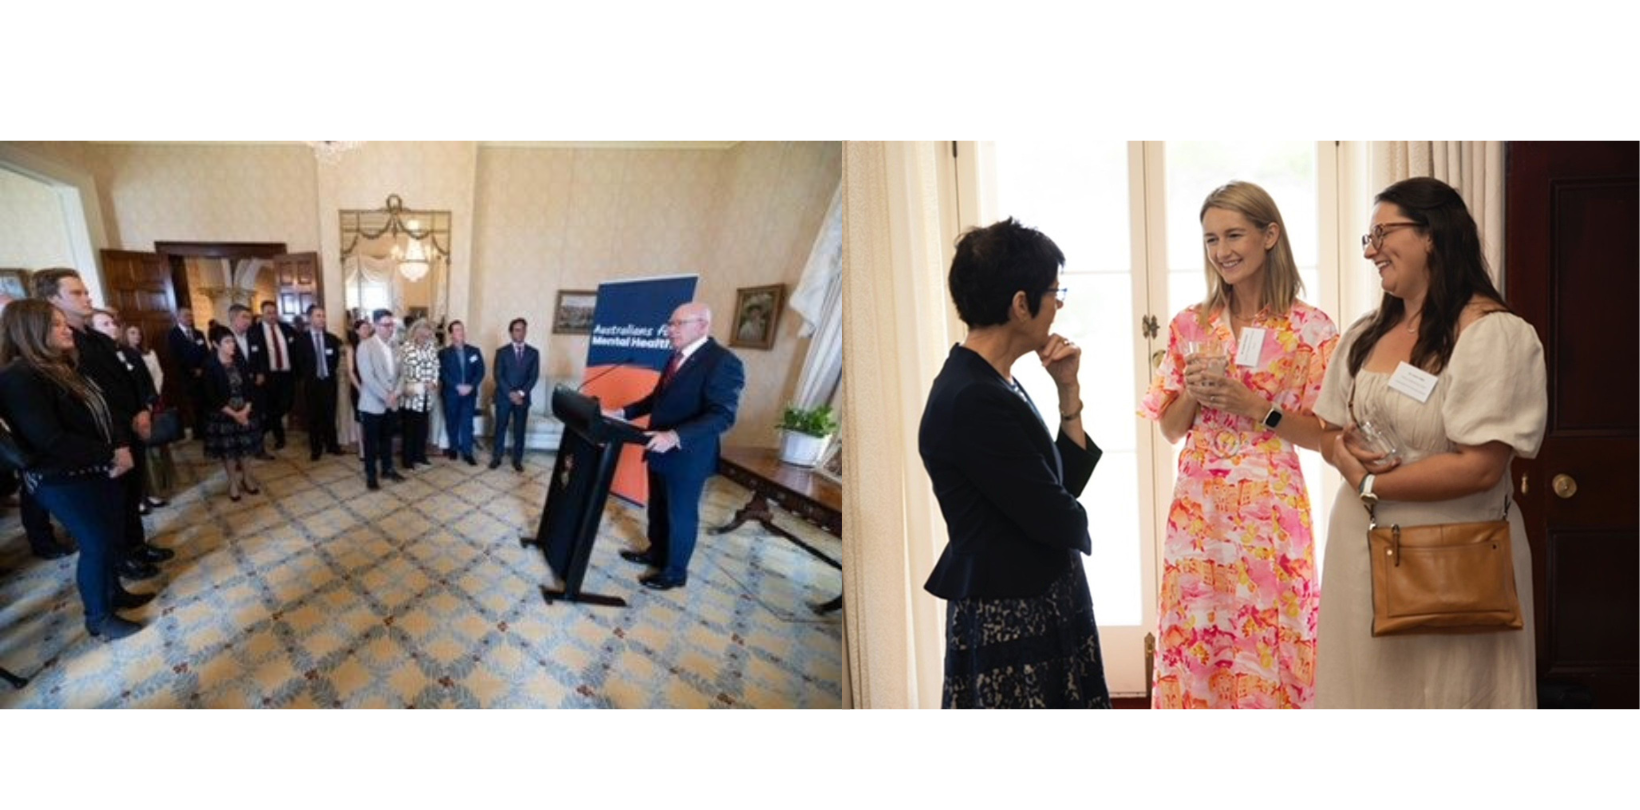 Fams attends Australians for Mental Health event at Admiralty House